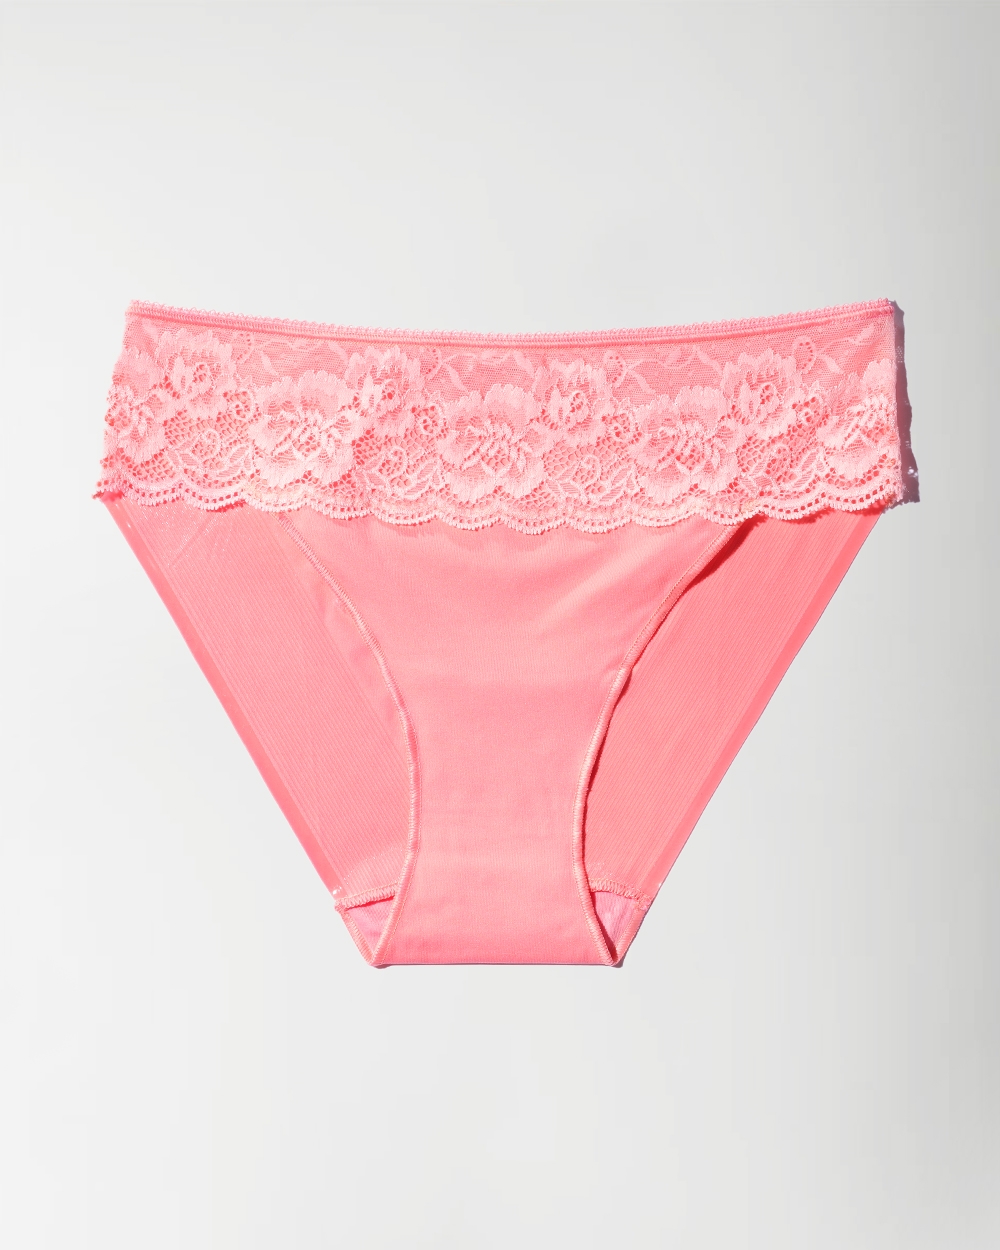 Soma<sup class=st-superscript>®</sup> pink lace trim waistband hipster panties.